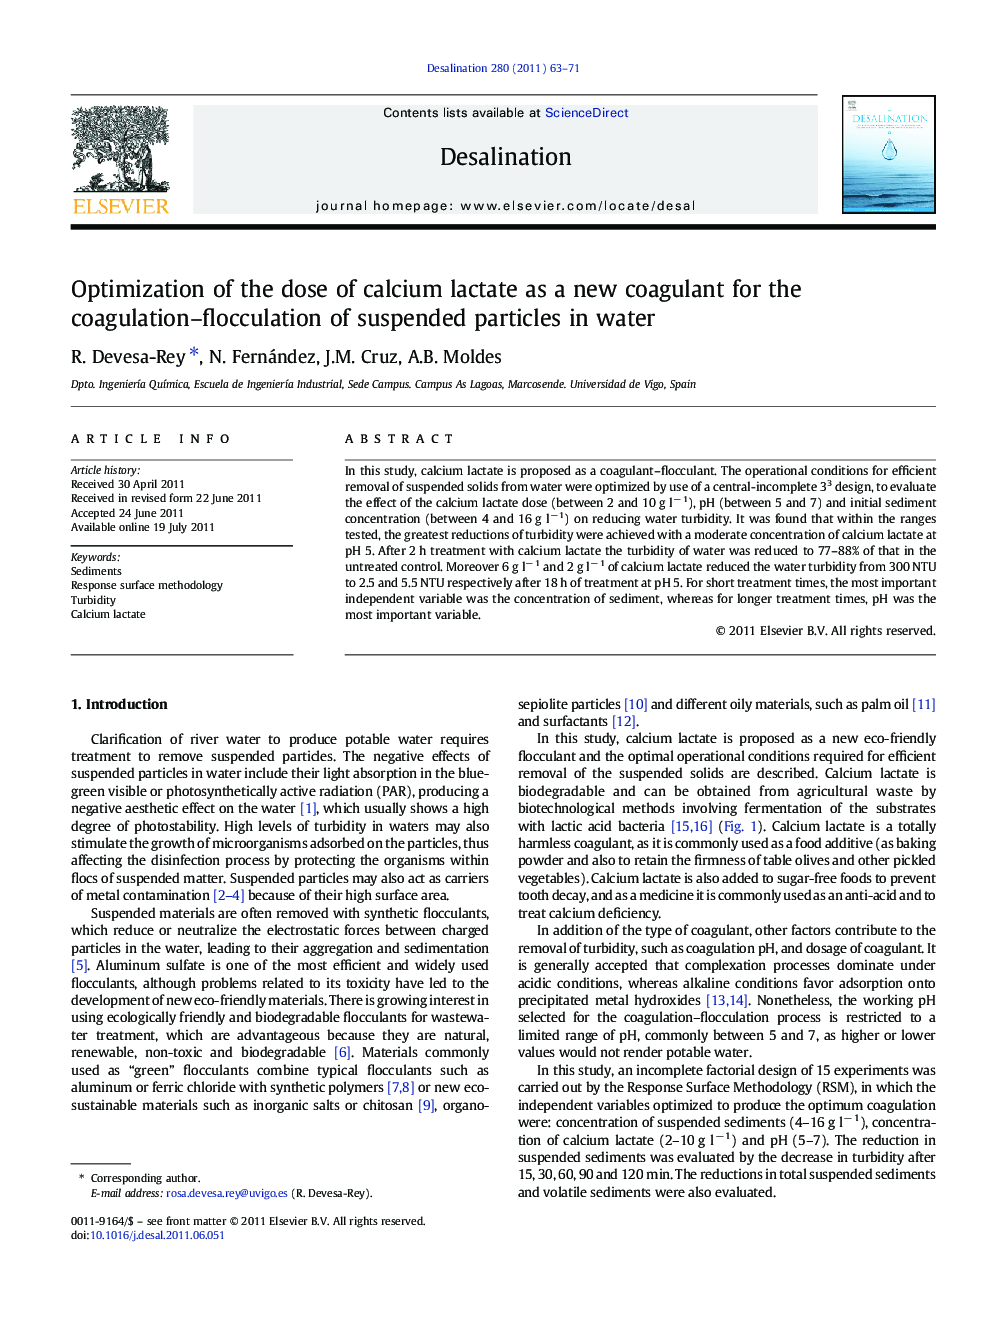 Optimization of the dose of calcium lactate as a new coagulant for the coagulation-flocculation of suspended particles in water